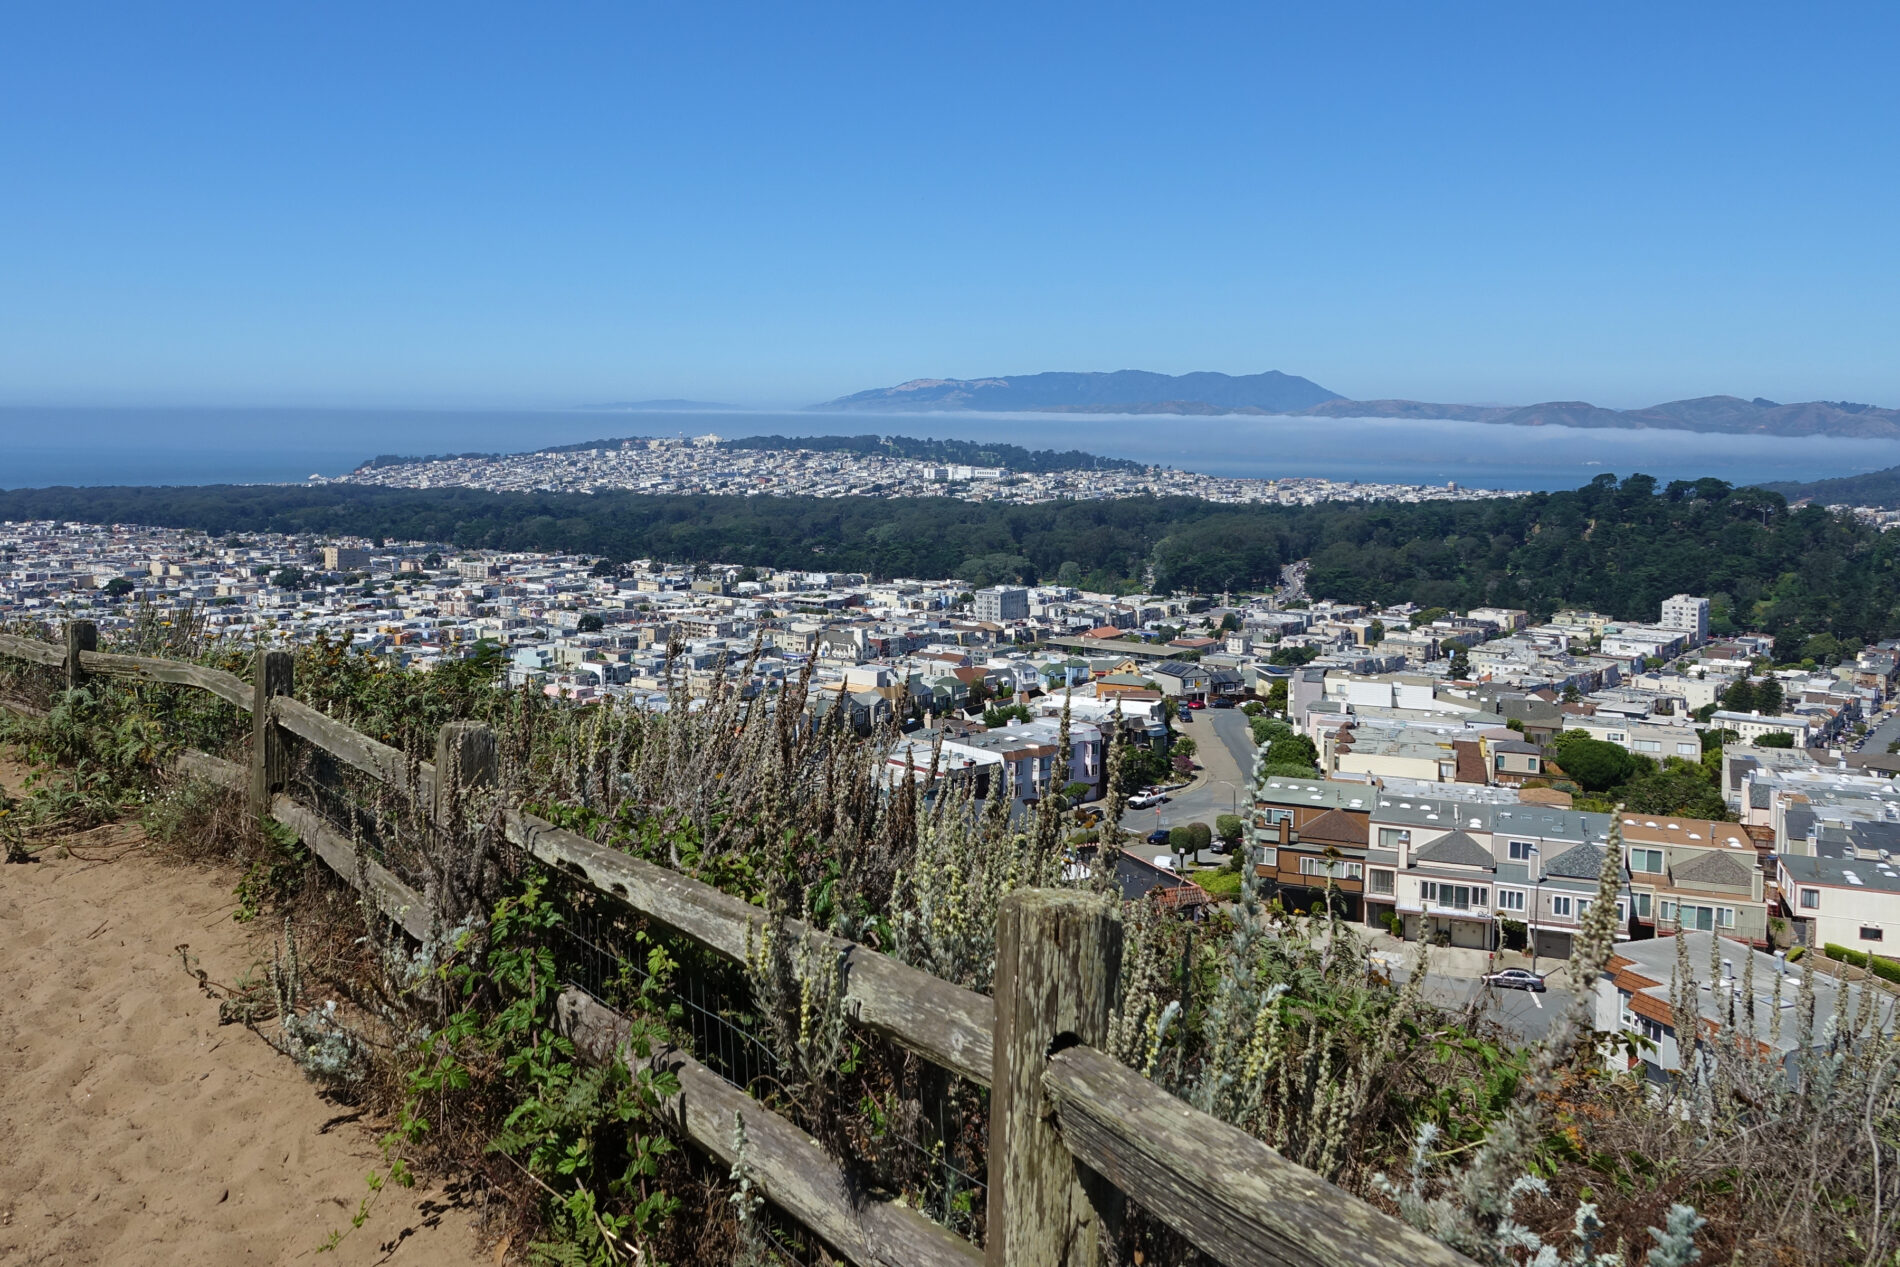 Grandview Park, atop one of the San Francisco Hills, has 360-degree views overlooking the city, bay, and ocean.